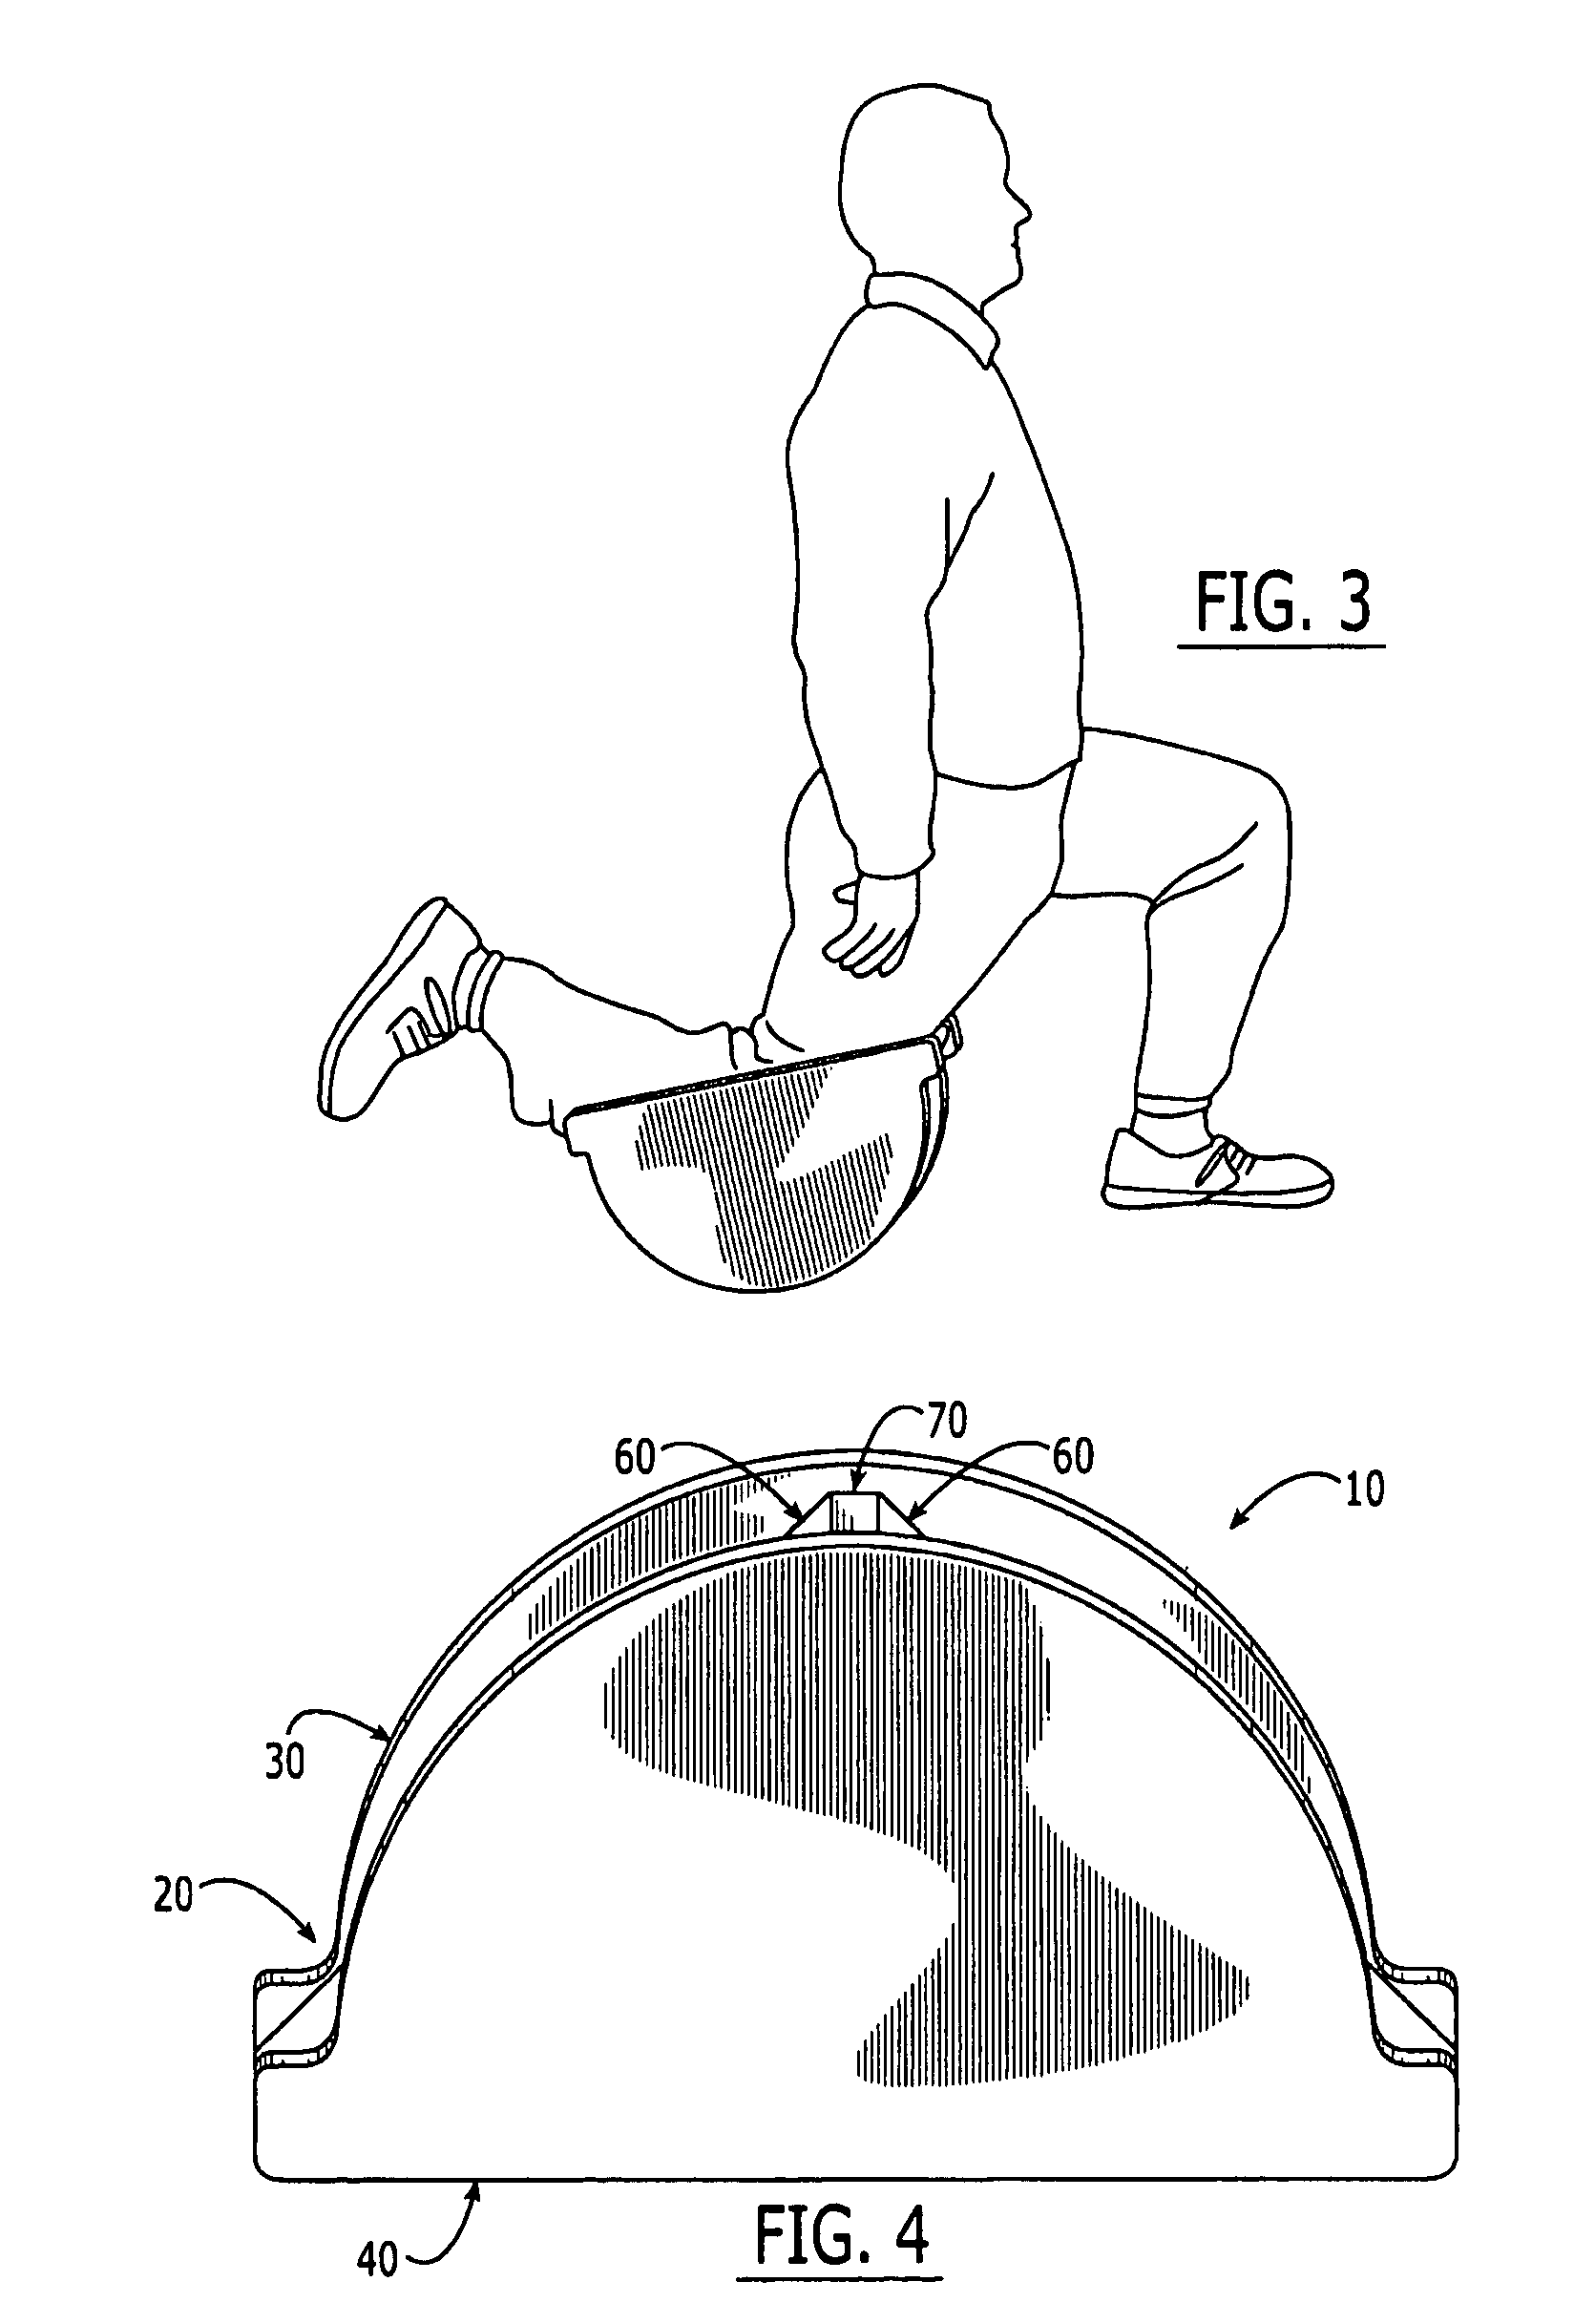 Lower extremity stretching device